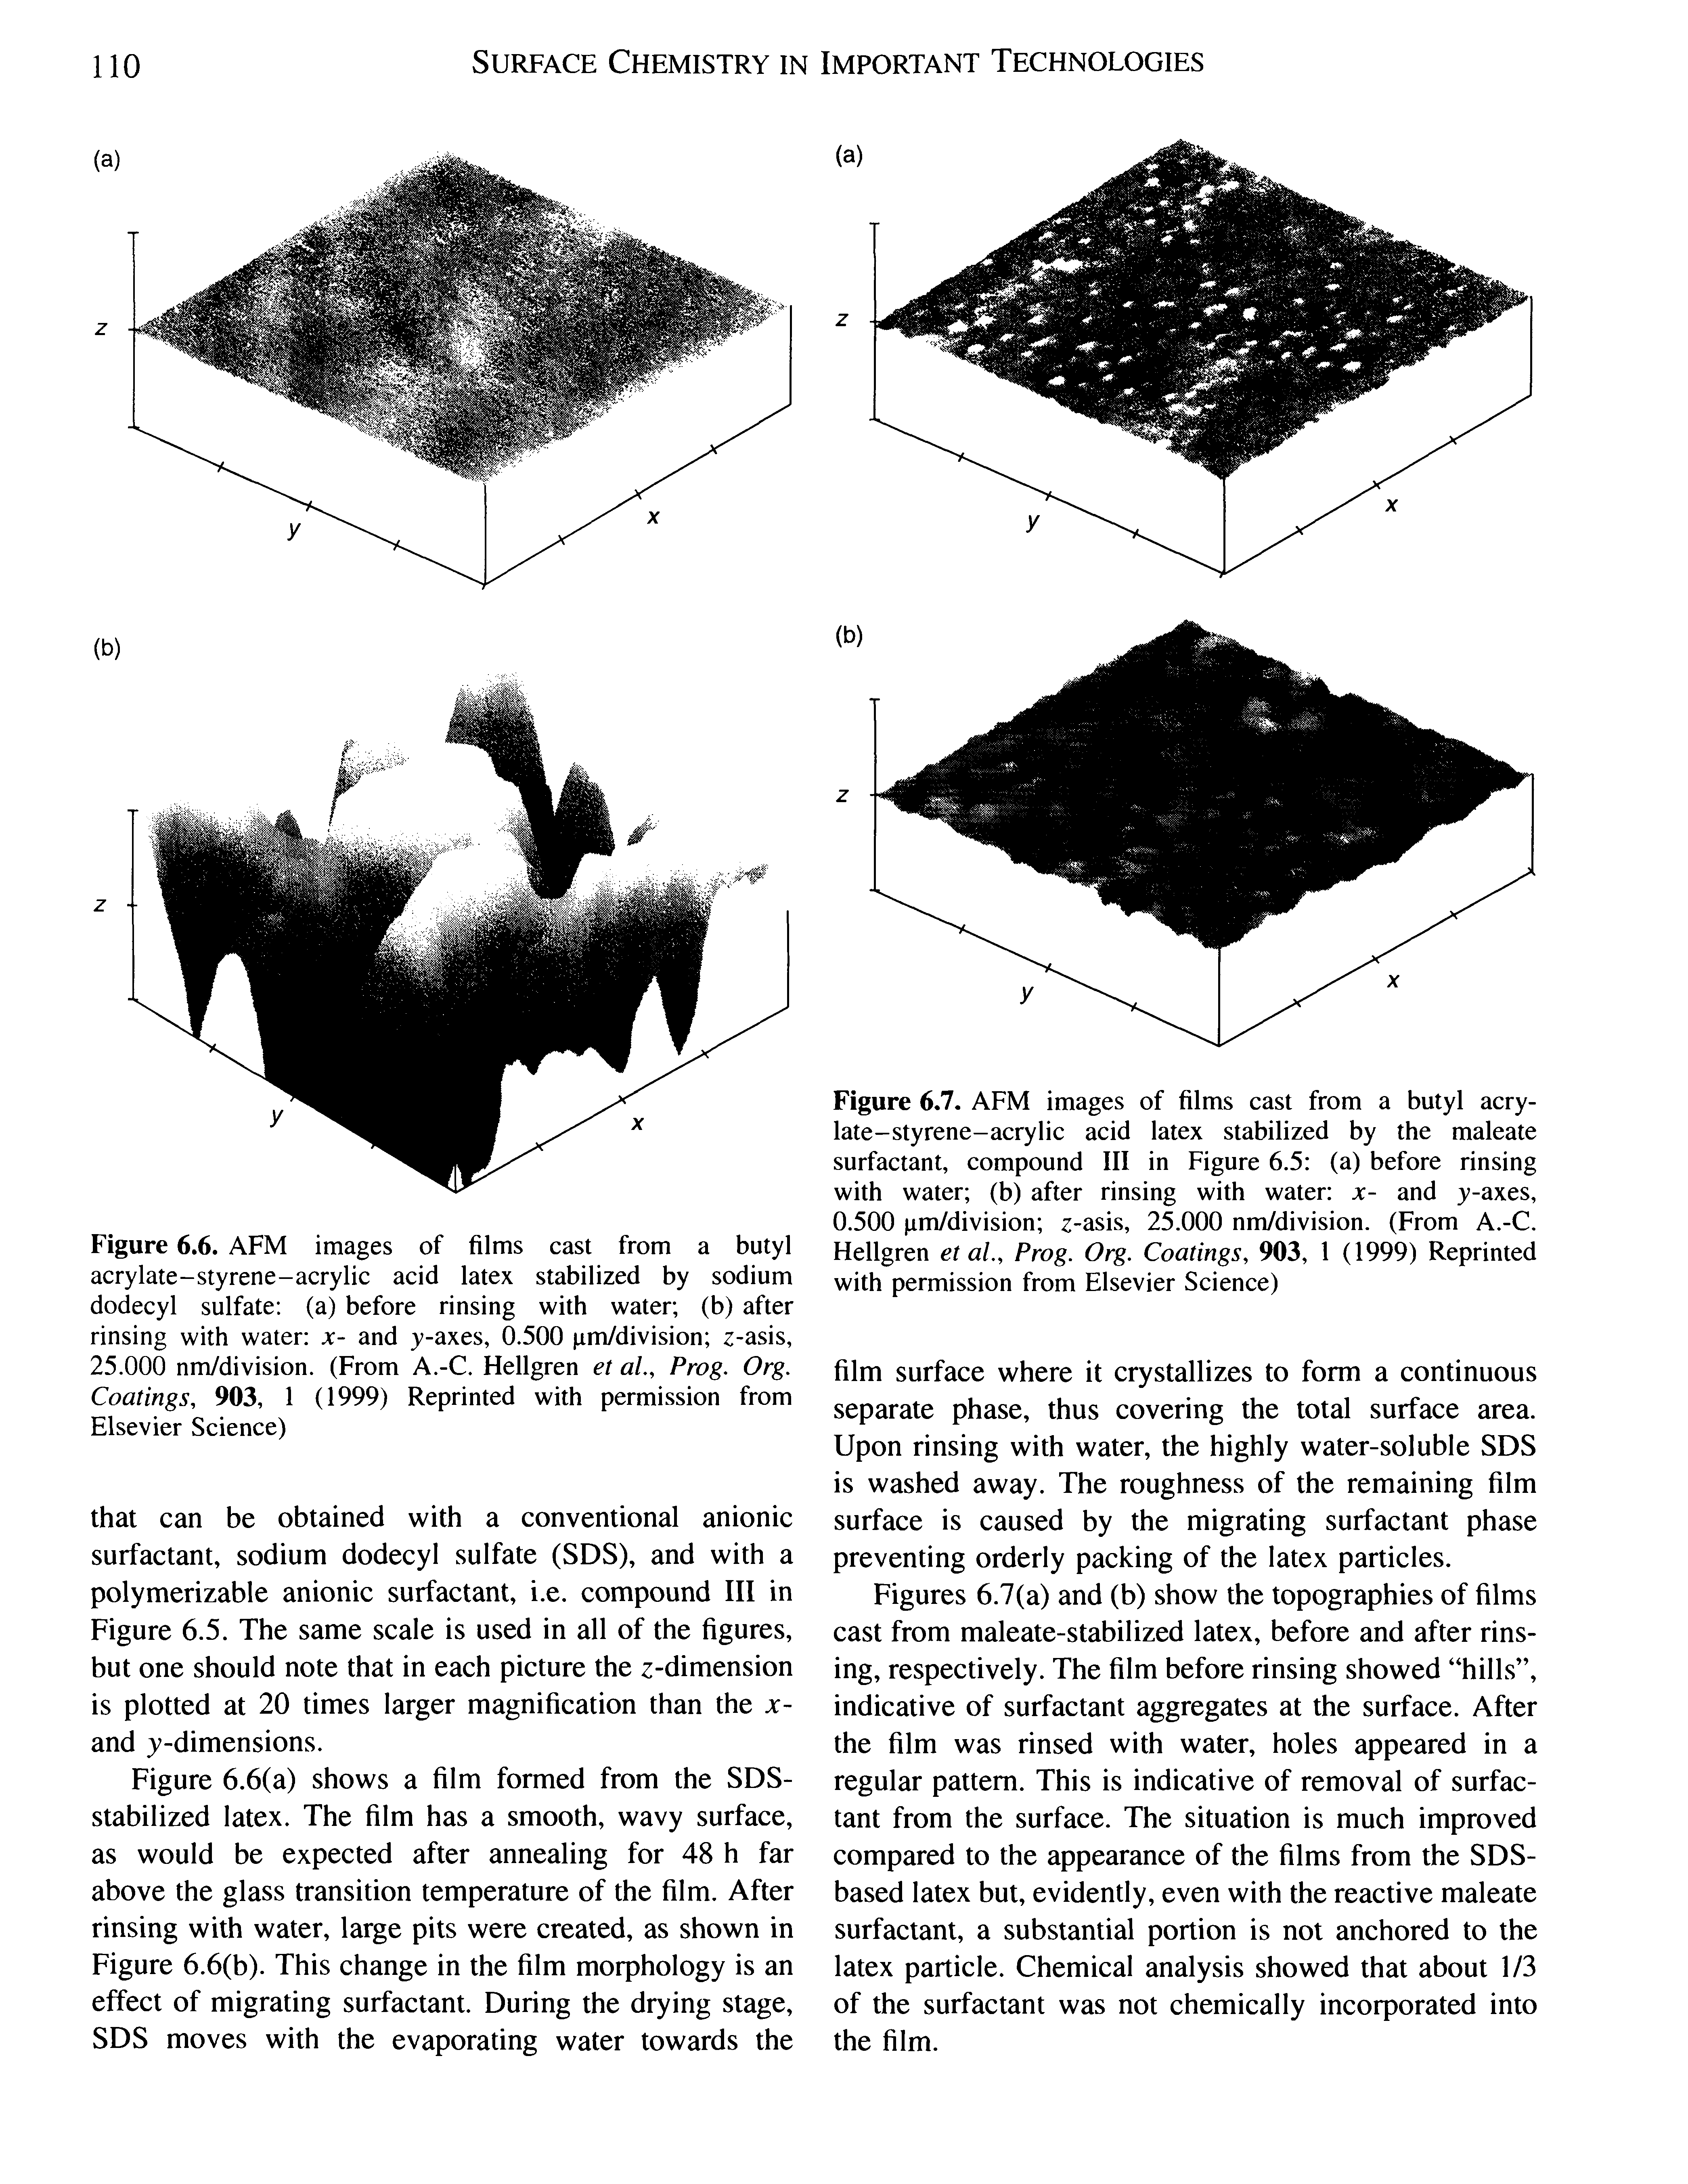 Figures 6.7(a) and (b) show the topographies of films cast from maleate-stabilized latex, before and after rinsing, respectively. The film before rinsing showed hills , indicative of surfactant aggregates at the surface. After the film was rinsed with water, holes appeared in a regular pattern. This is indicative of removal of surfactant from the surface. The situation is much improved compared to the appearance of the films from the SDS-based latex but, evidently, even with the reactive maleate surfactant, a substantial portion is not anchored to the latex particle. Chemical analysis showed that about 1/3 of the surfactant was not chemically incorporated into the film.